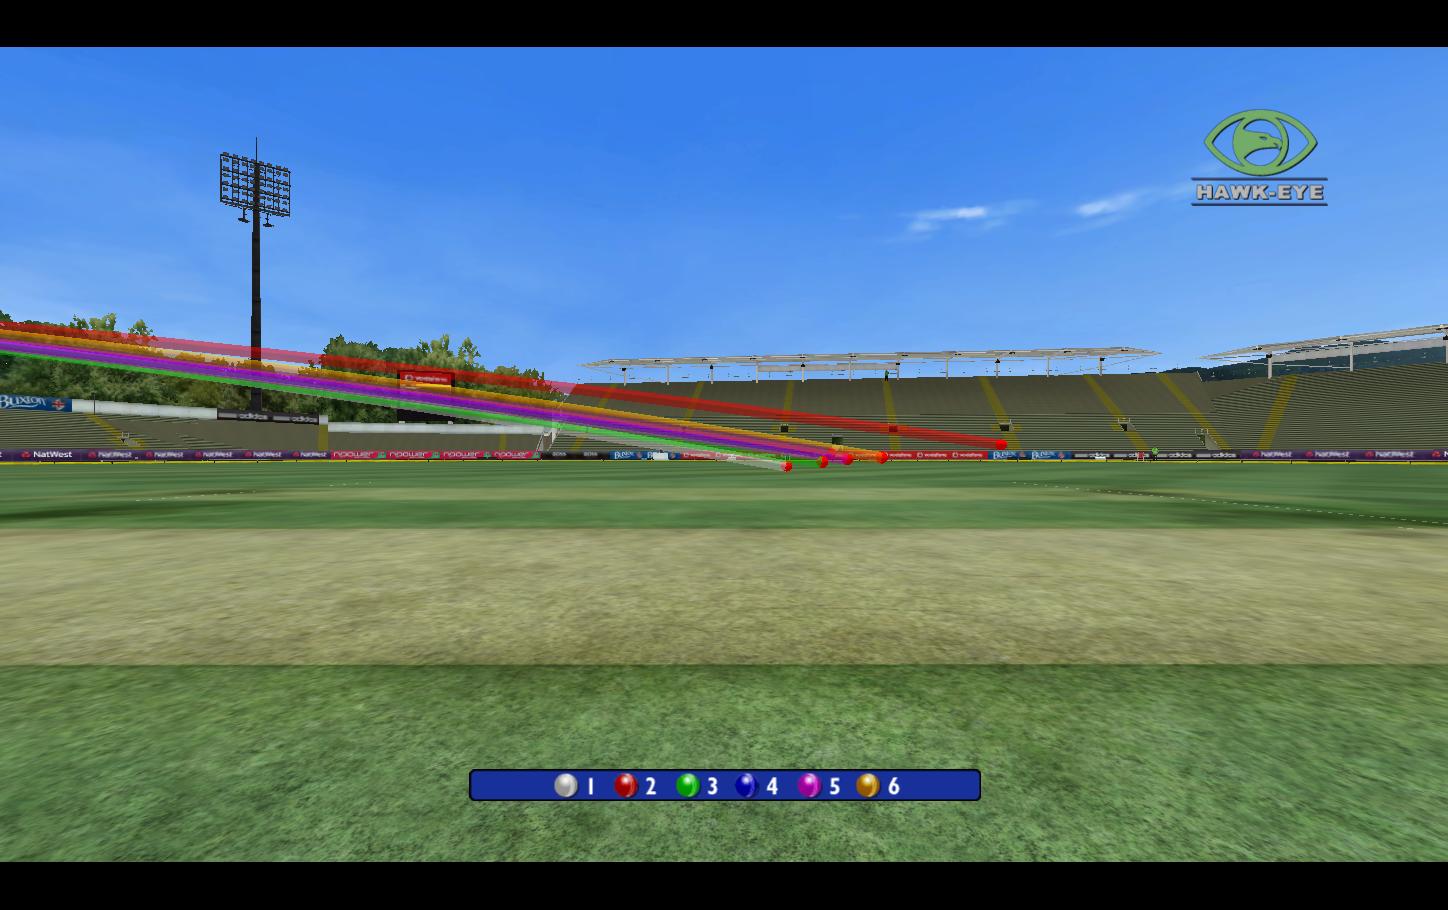 Super patch of planet of cricket 07 full